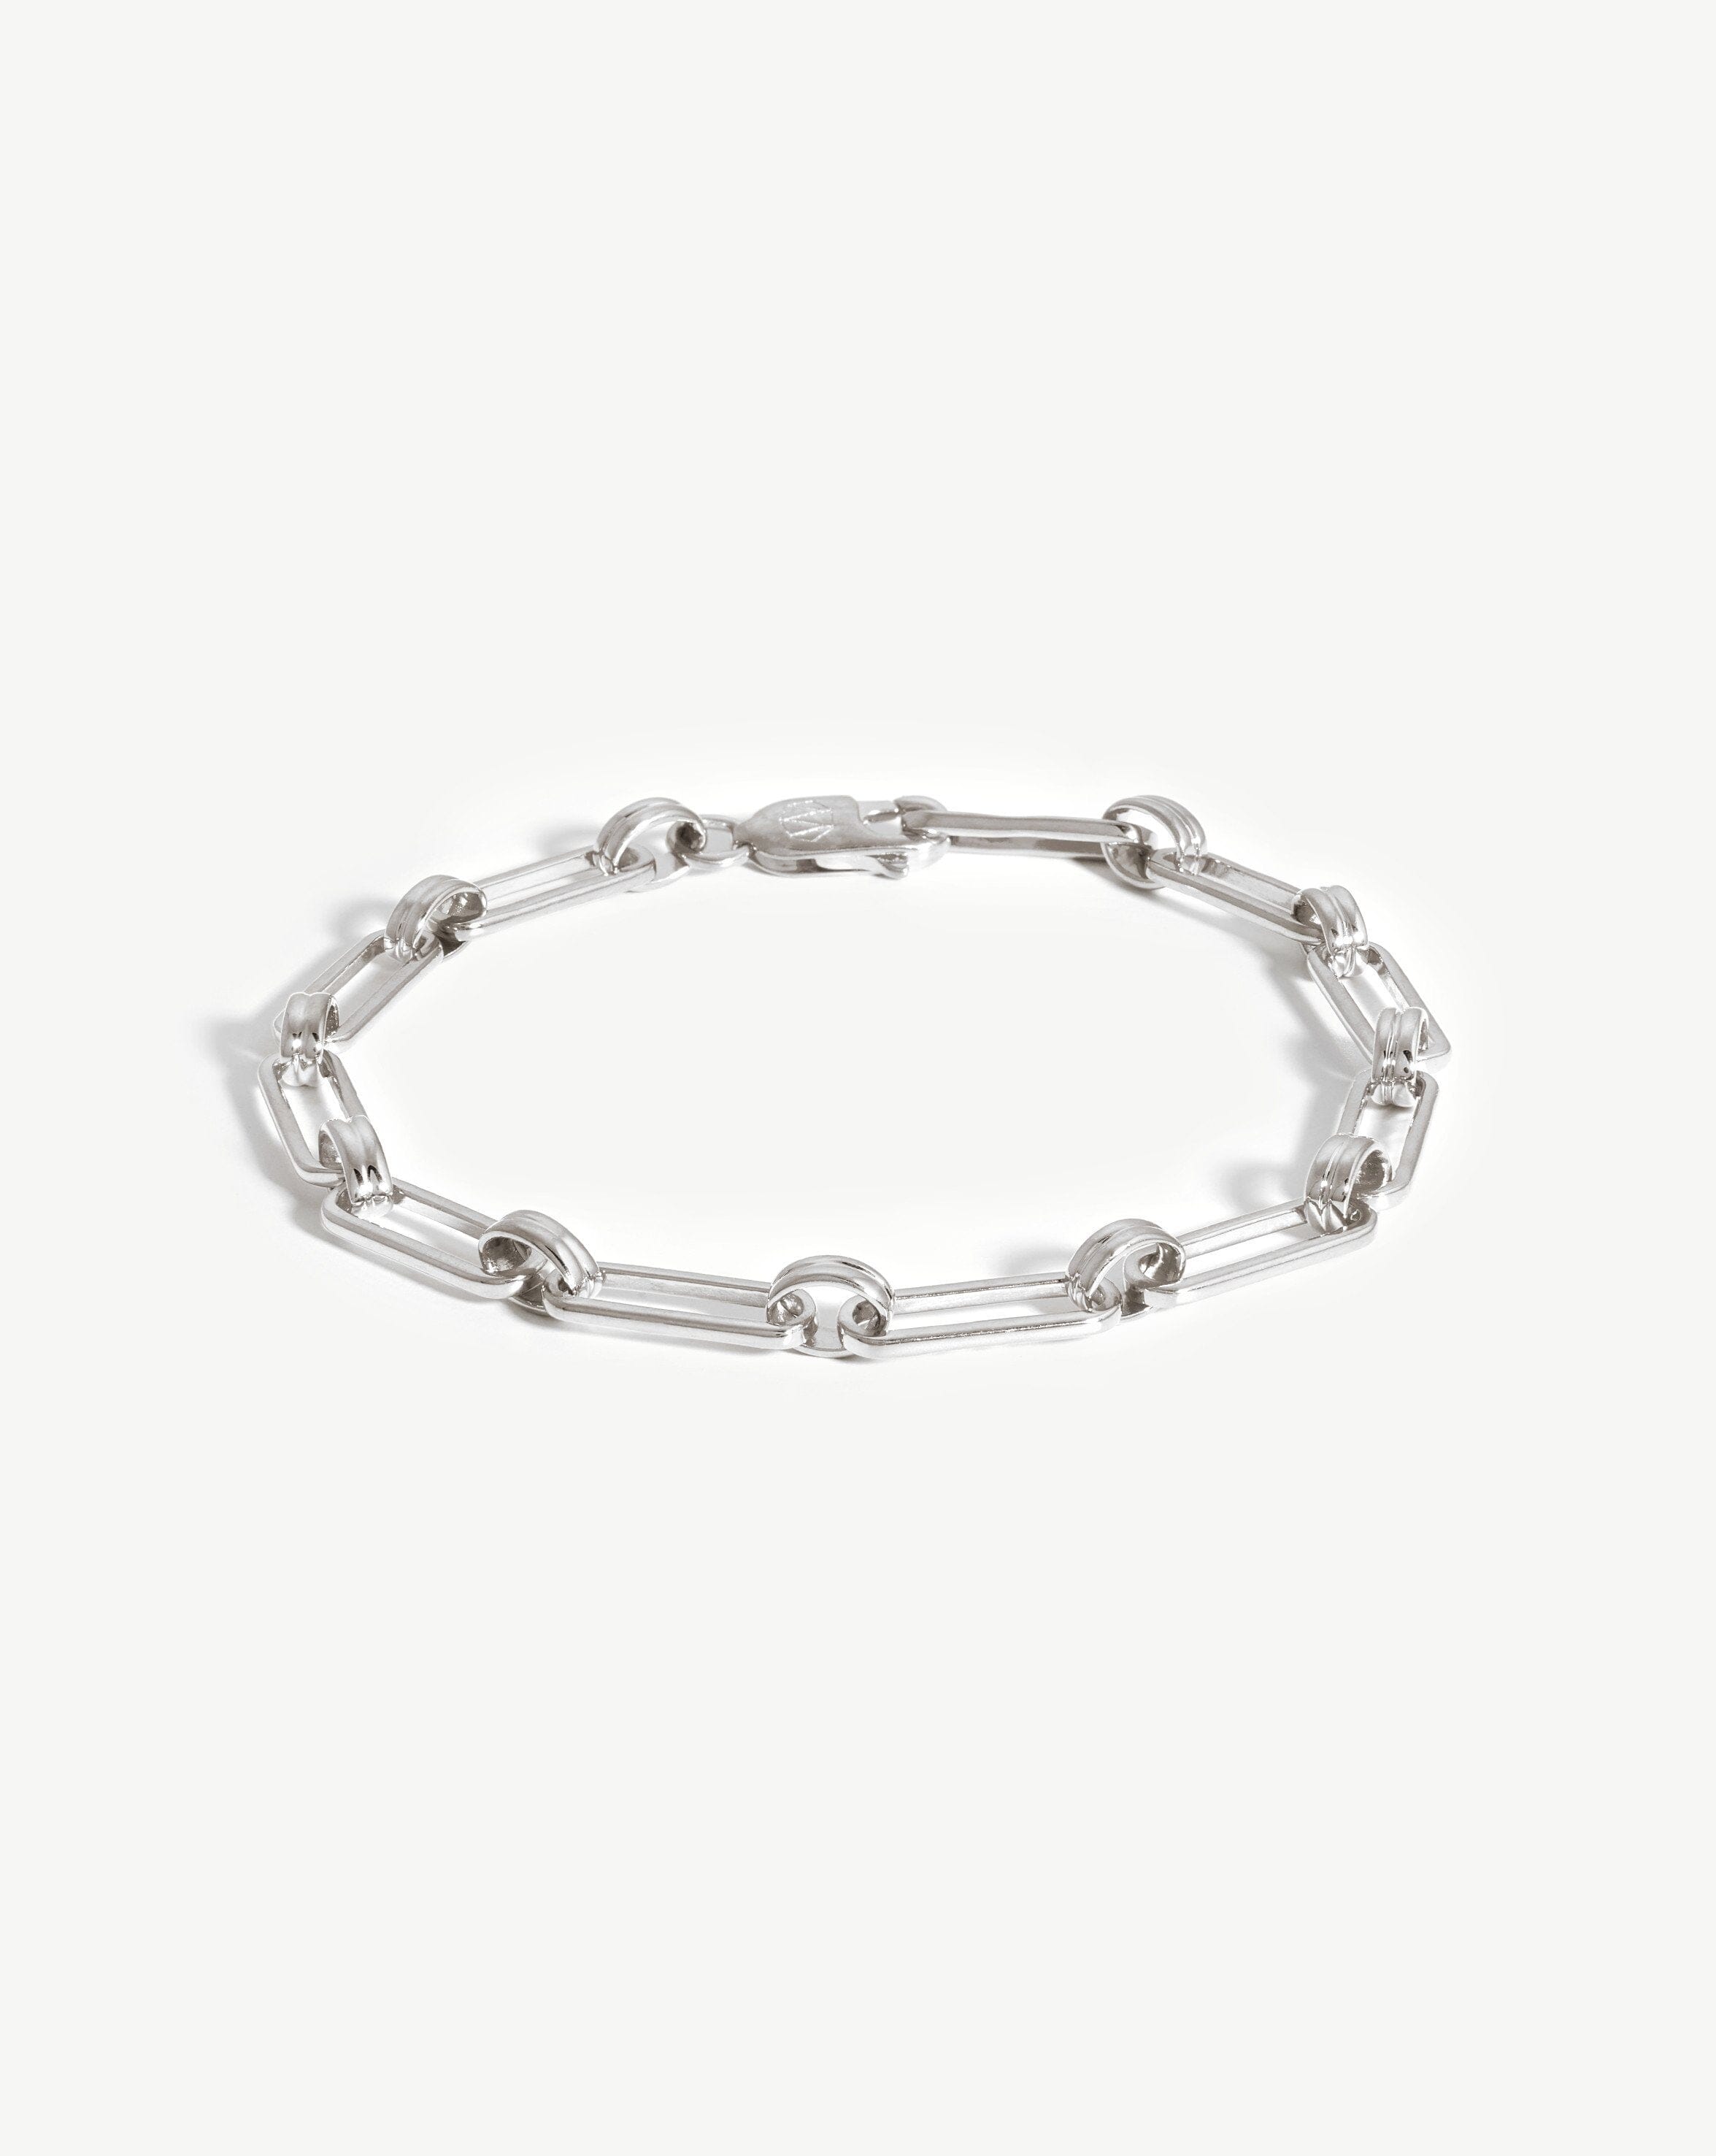 Aegis Chain Bracelet | Silver Plated